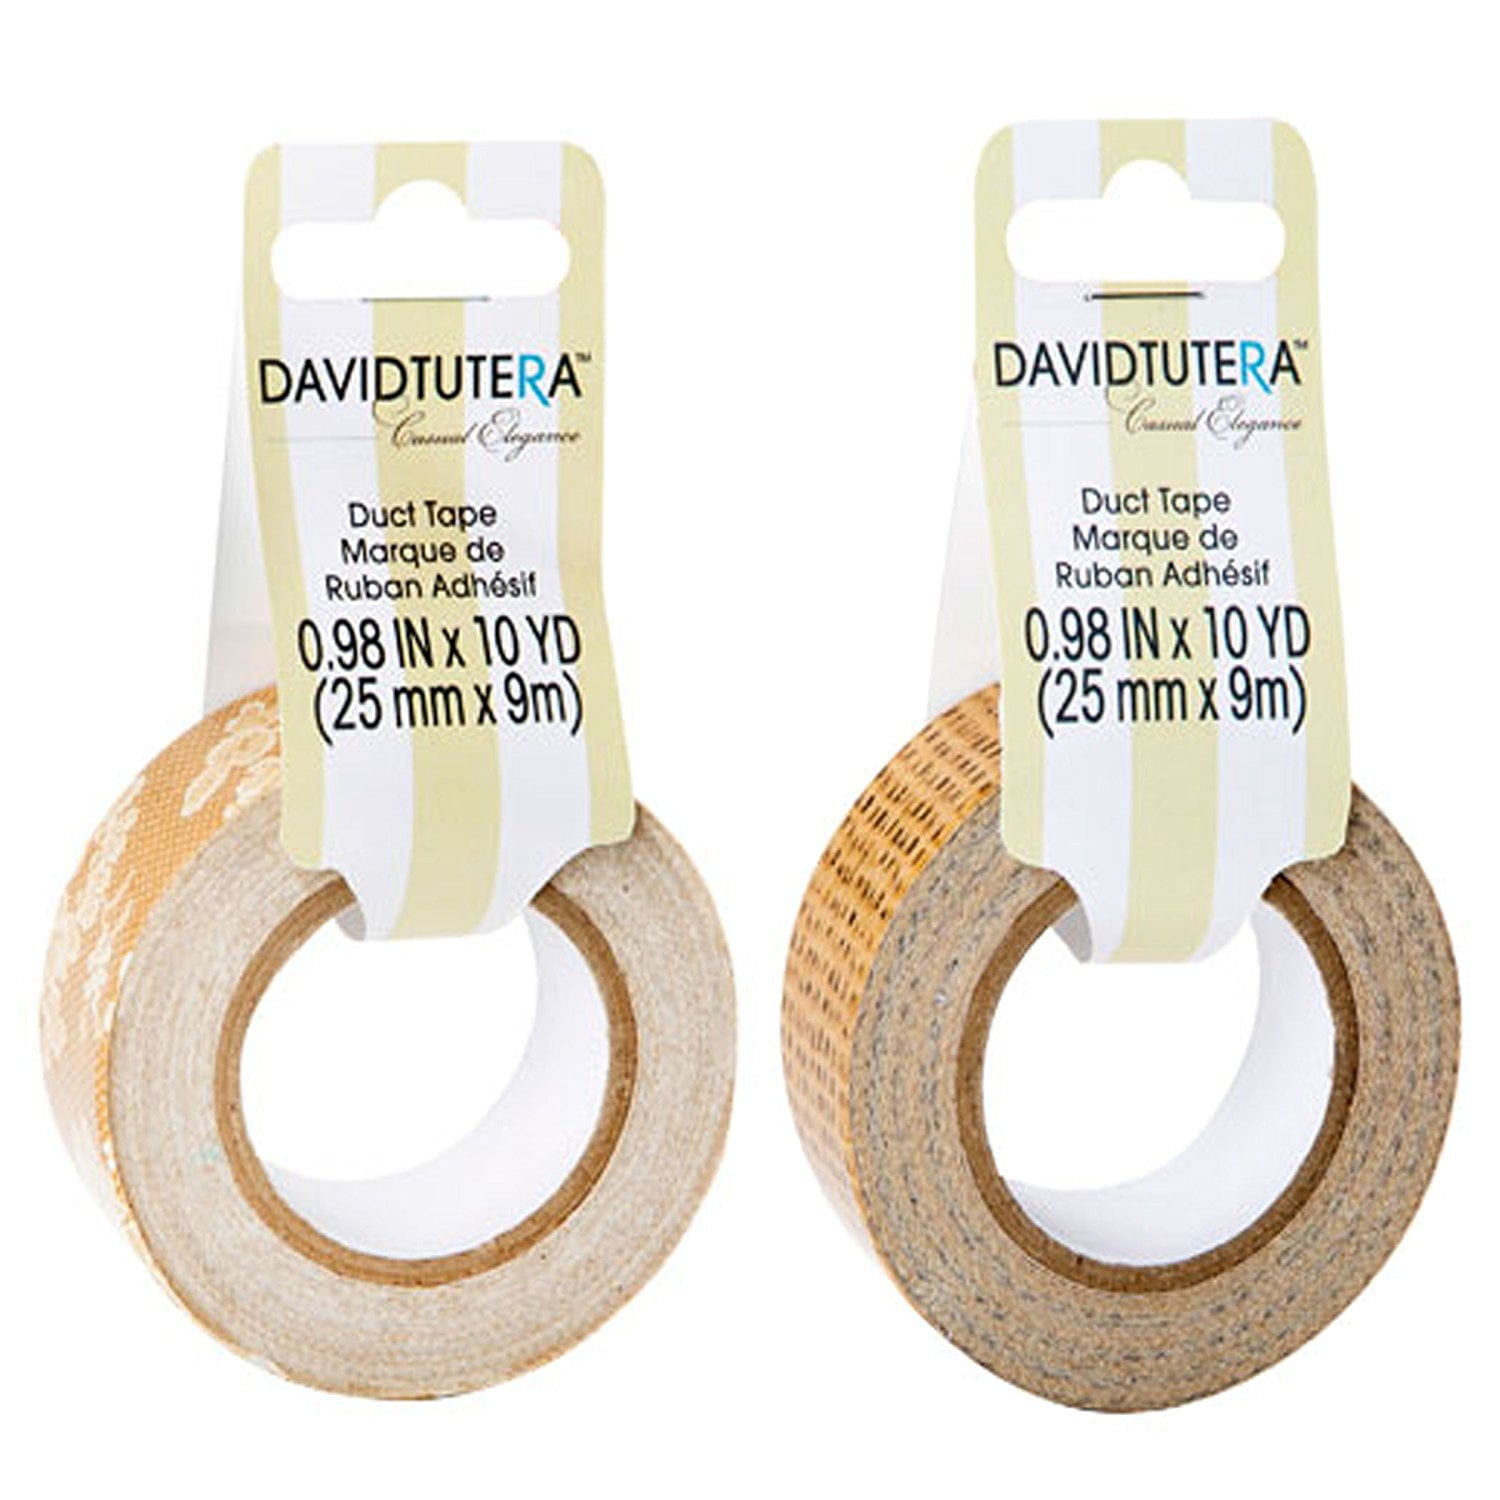 Details about   10 YD ROLL DAVID TUTERA WEDDING DUCT TAPE BURLAP OR LACE Scrapbooking & Crafts 